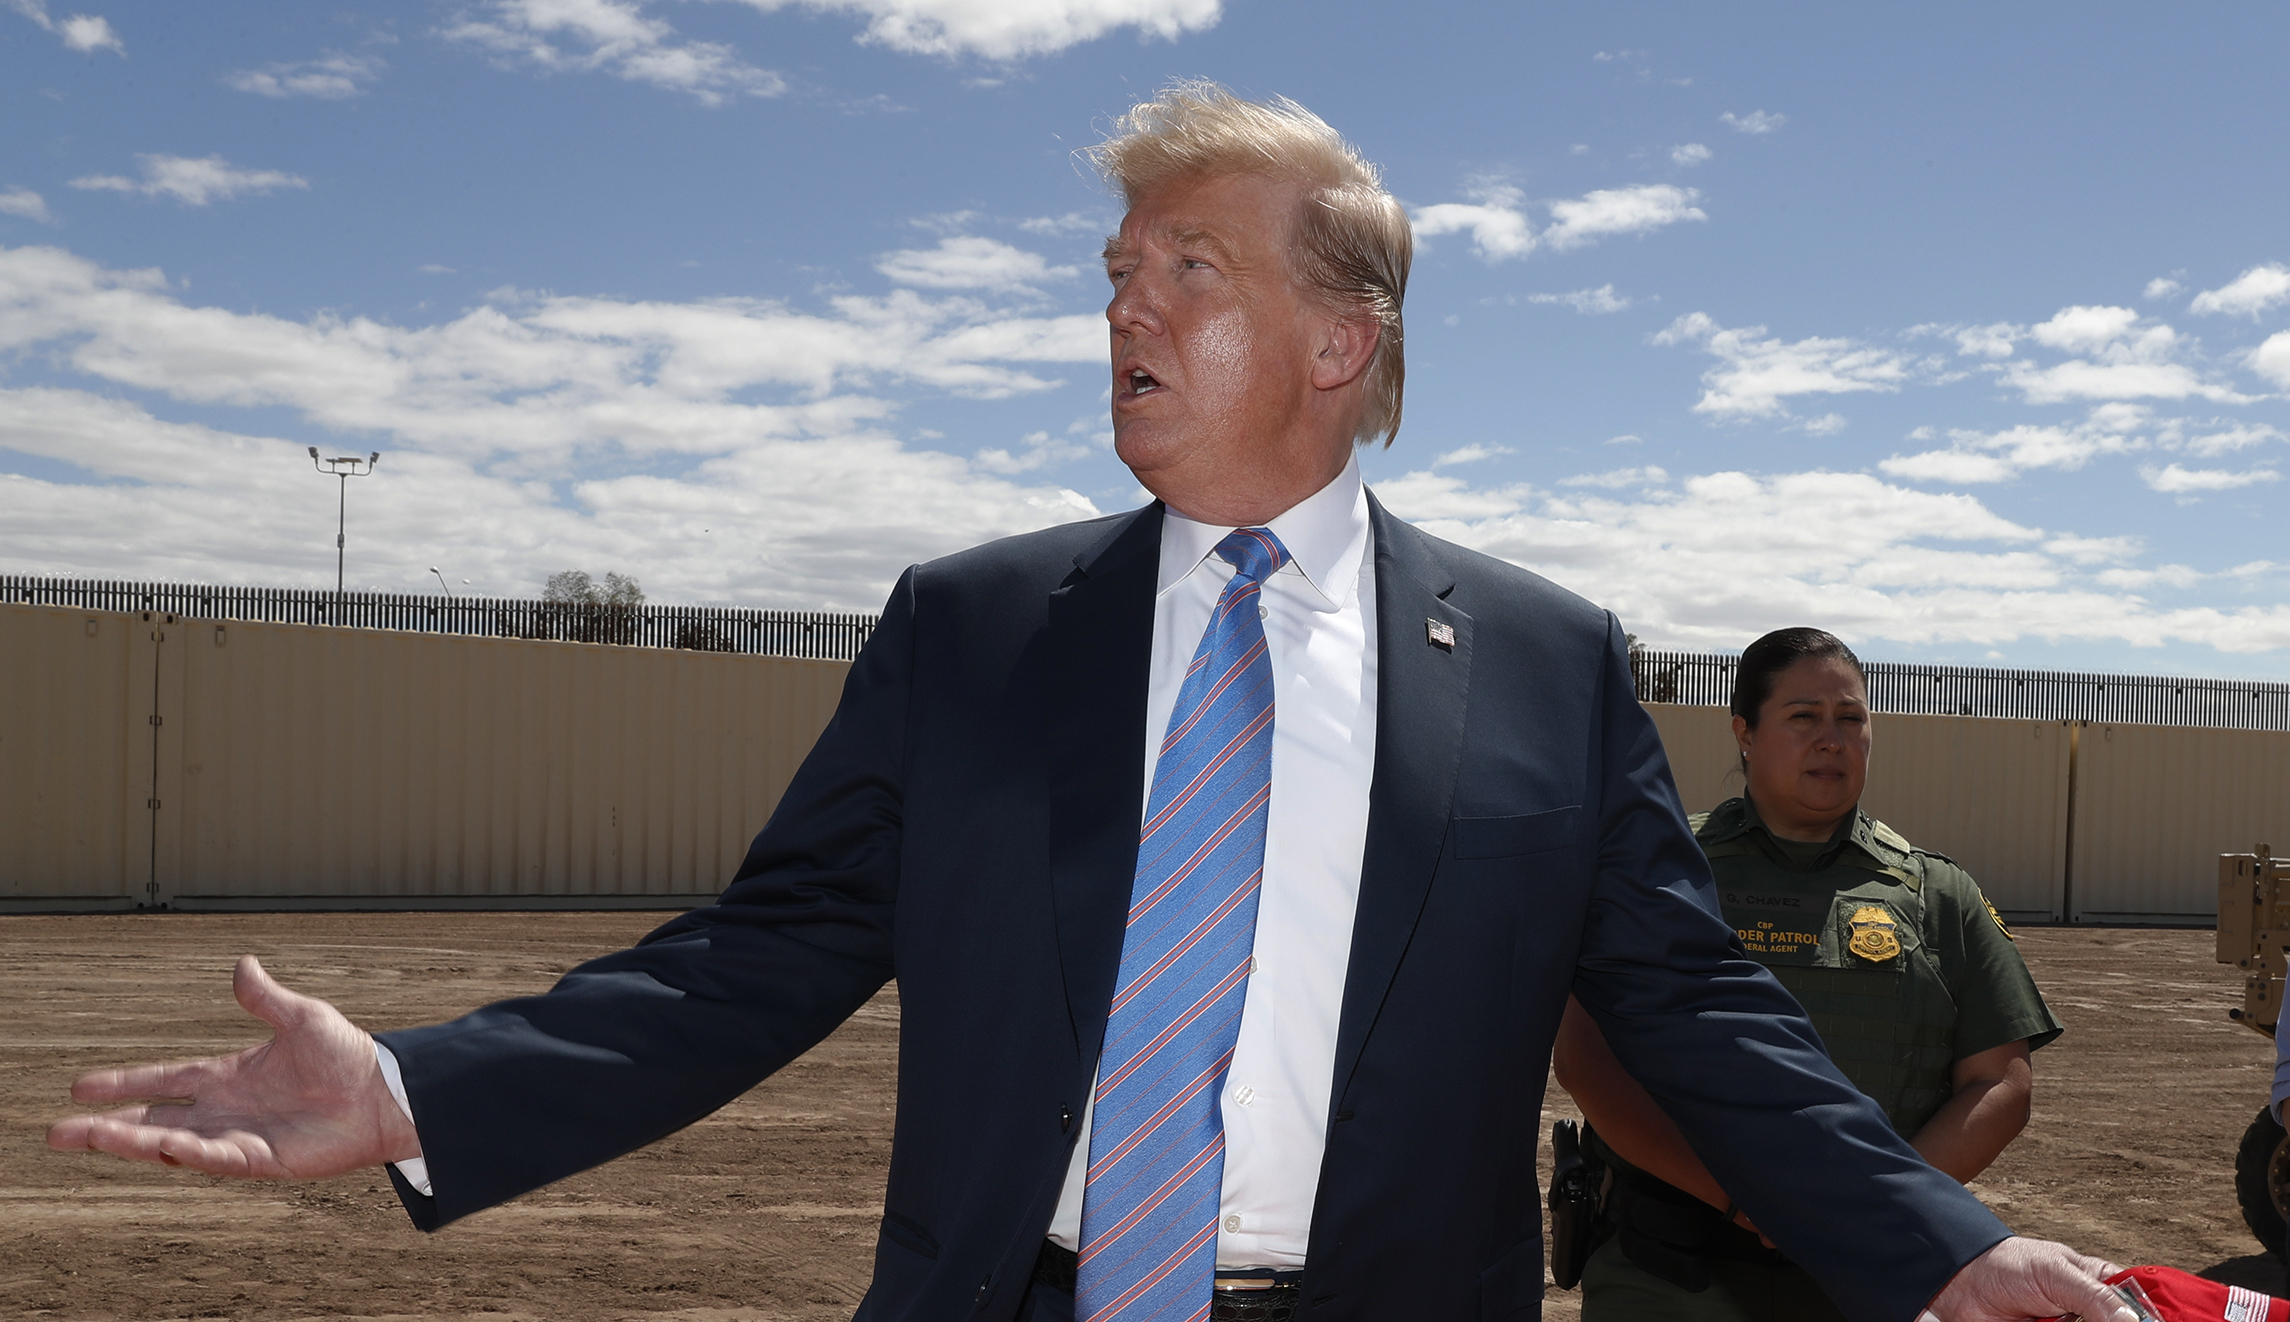 Trump has not built a single mile of new border fence after 30 months in office - Washington Examiner